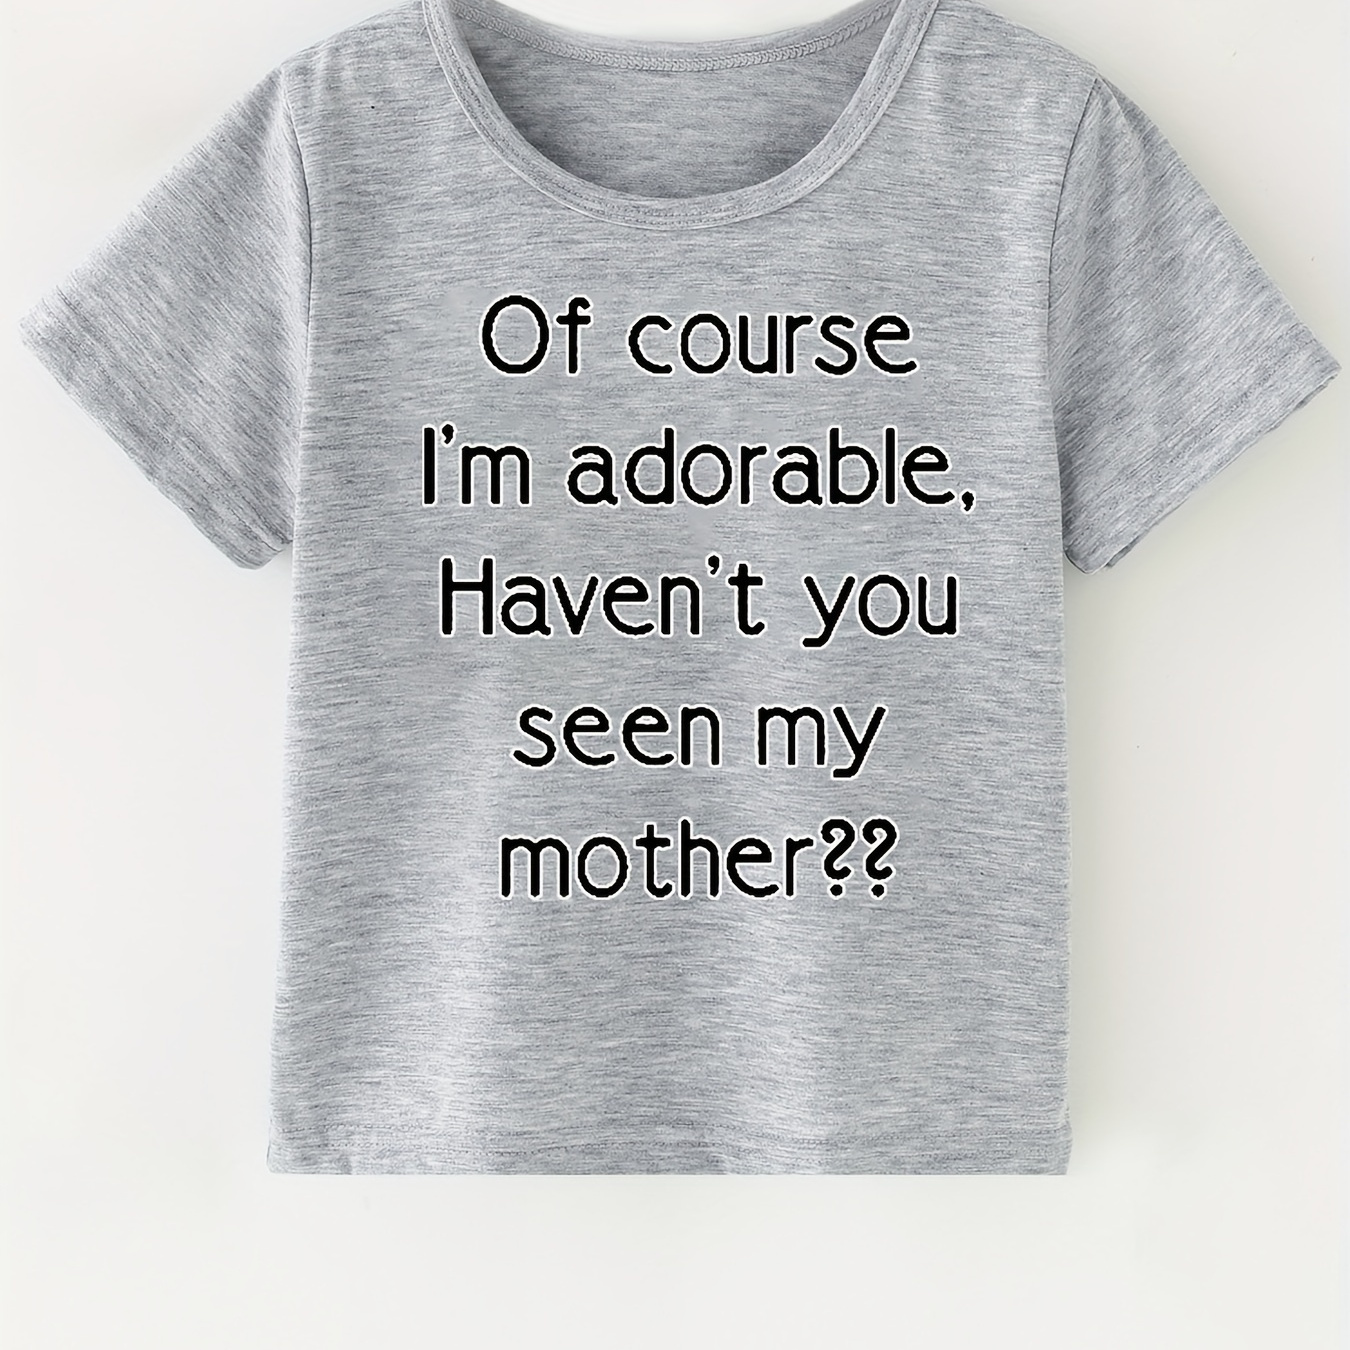 

of Course I'm Adorable, Haven't You Seen My Mother" Print Boys Creative T-shirt, Casual Lightweight Comfy Short Sleeve Tee Tops, Kids Clothings For Summer